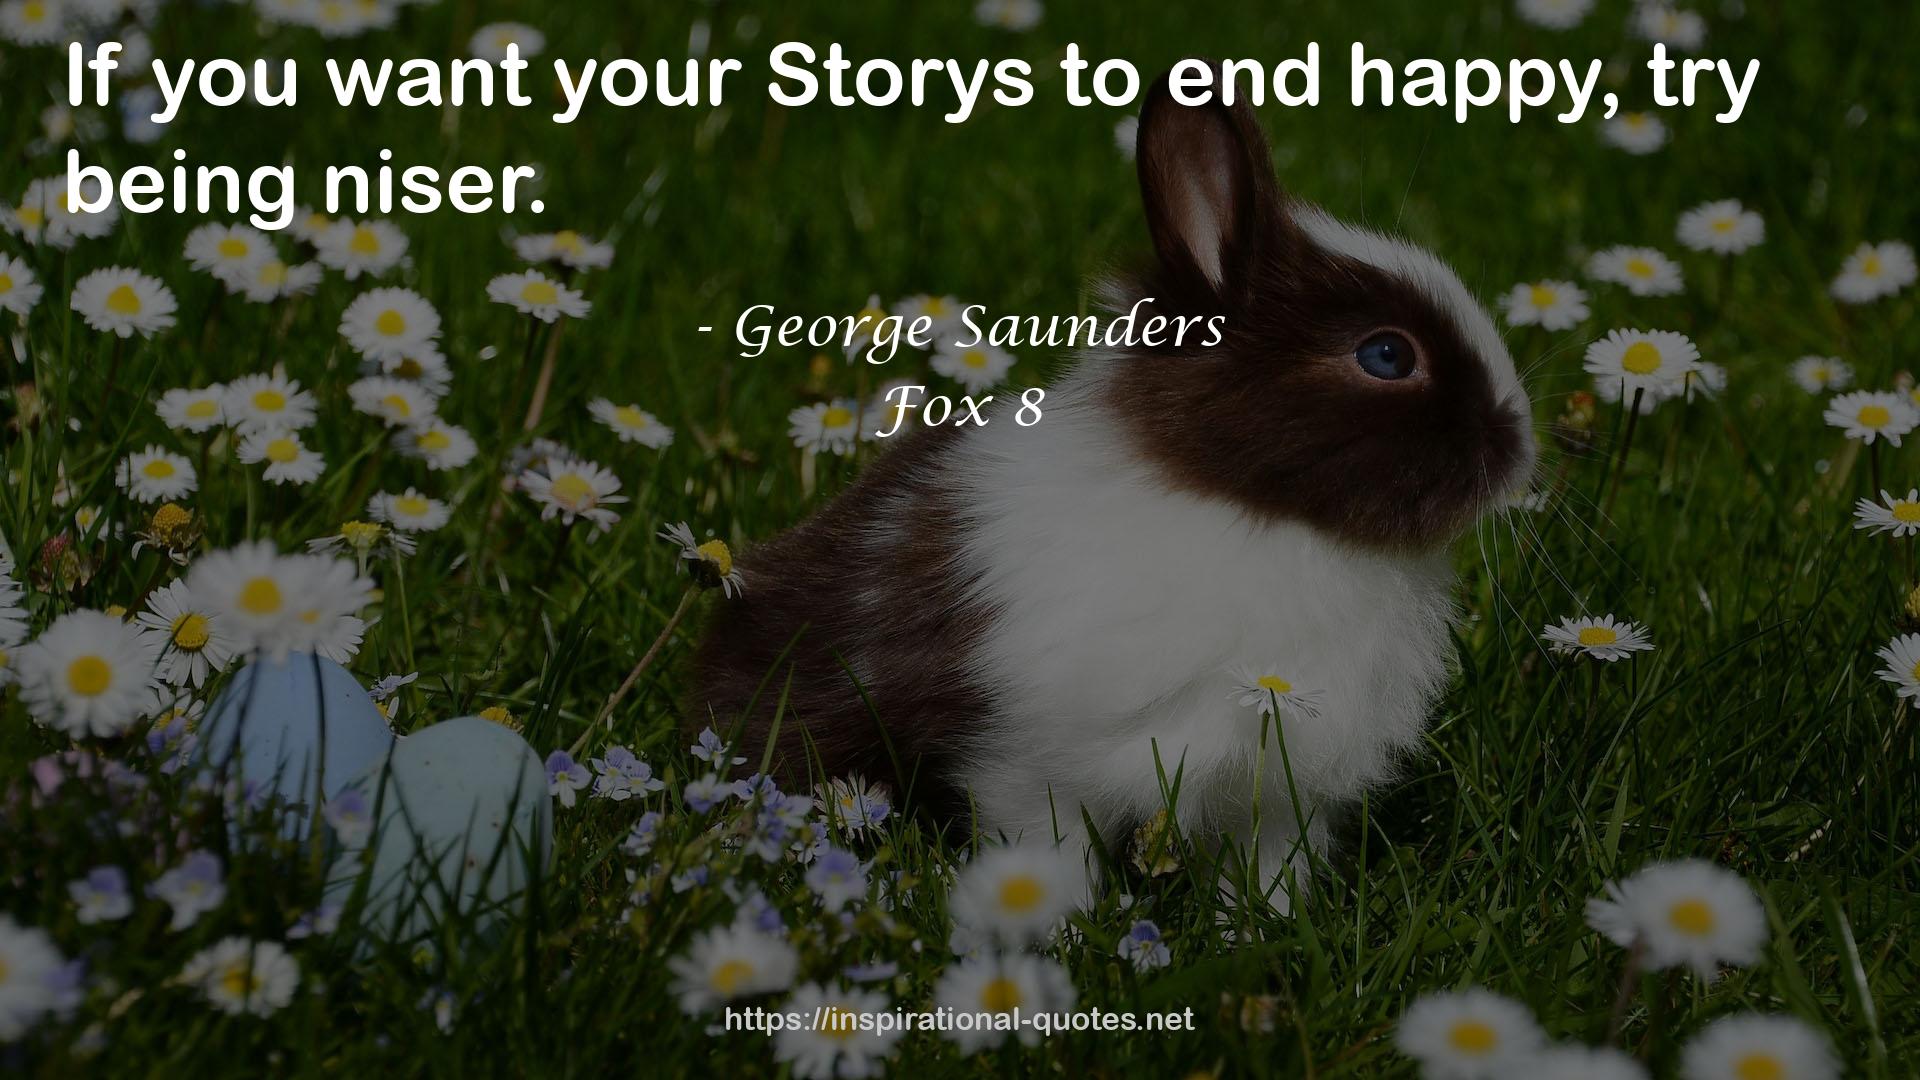 George Saunders QUOTES